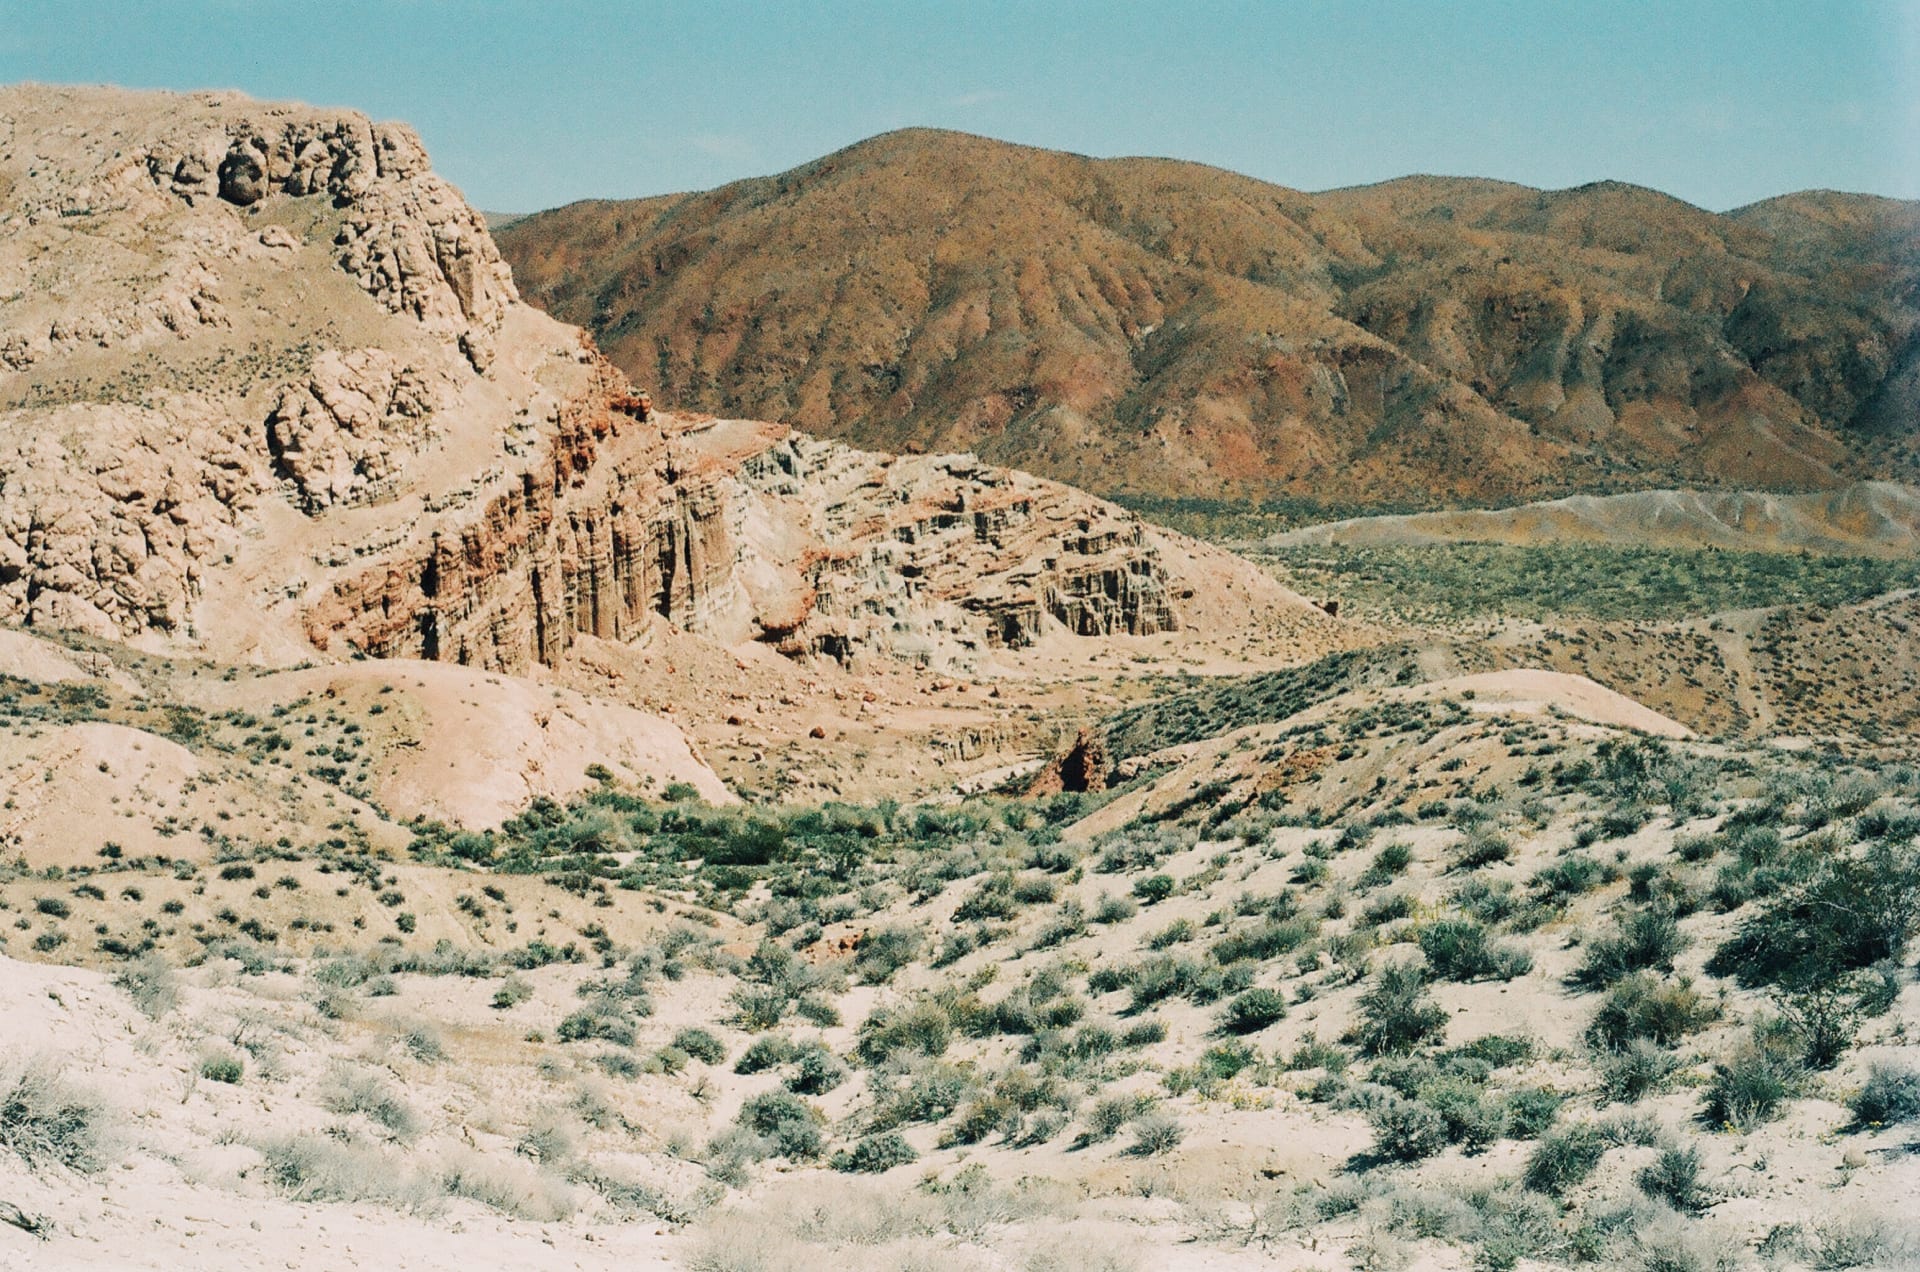 The trails of Red Rock Canyon State Park.